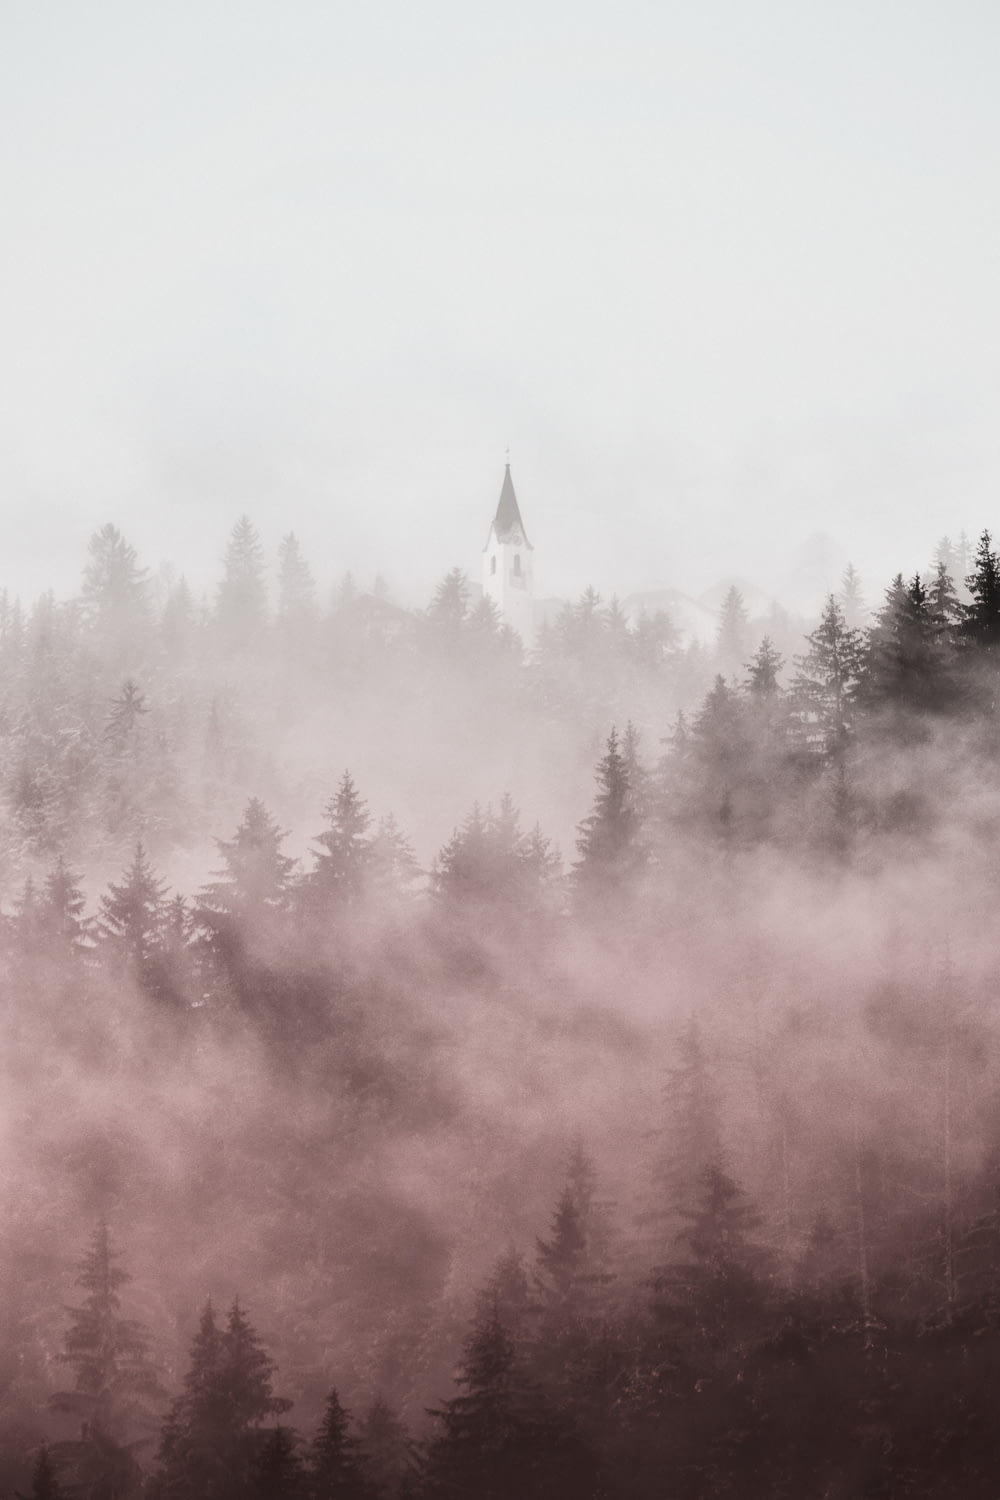 pine trees covered in fogs